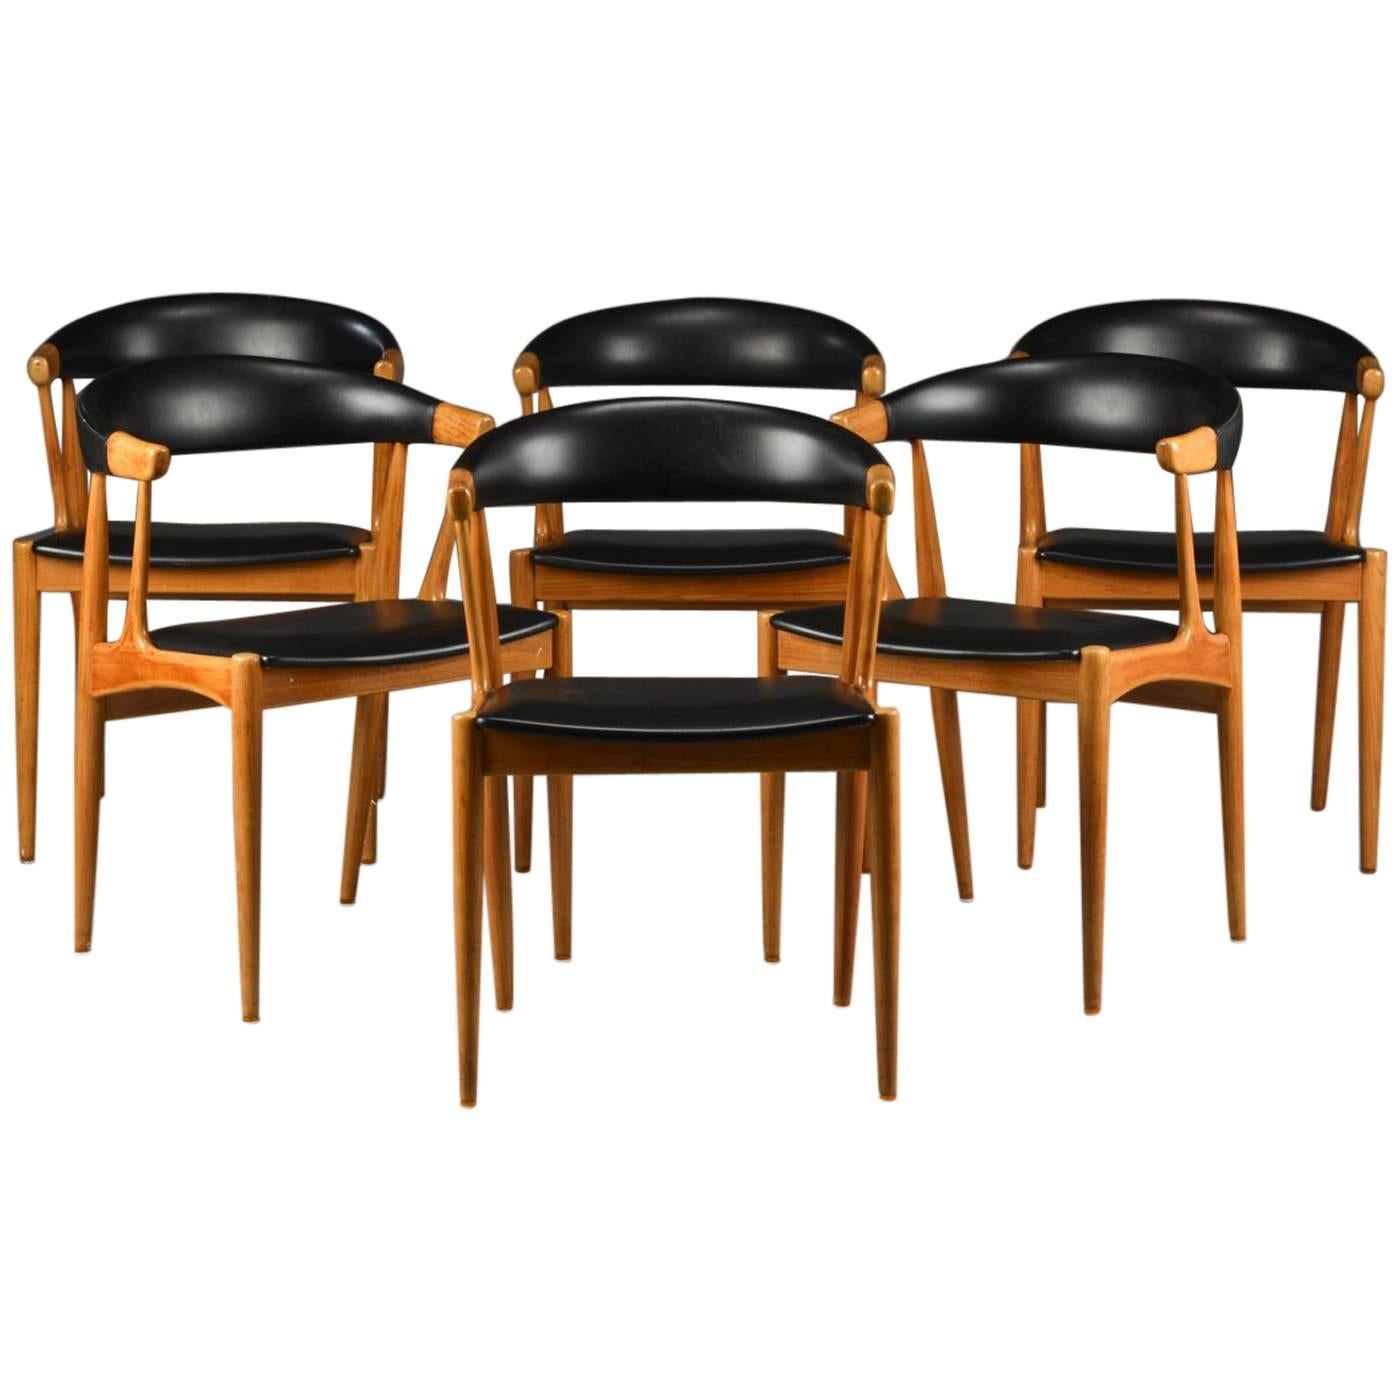 1960s Johannes Andersen Model BA 113 Dining Chairs - Teak and Black Leatherette